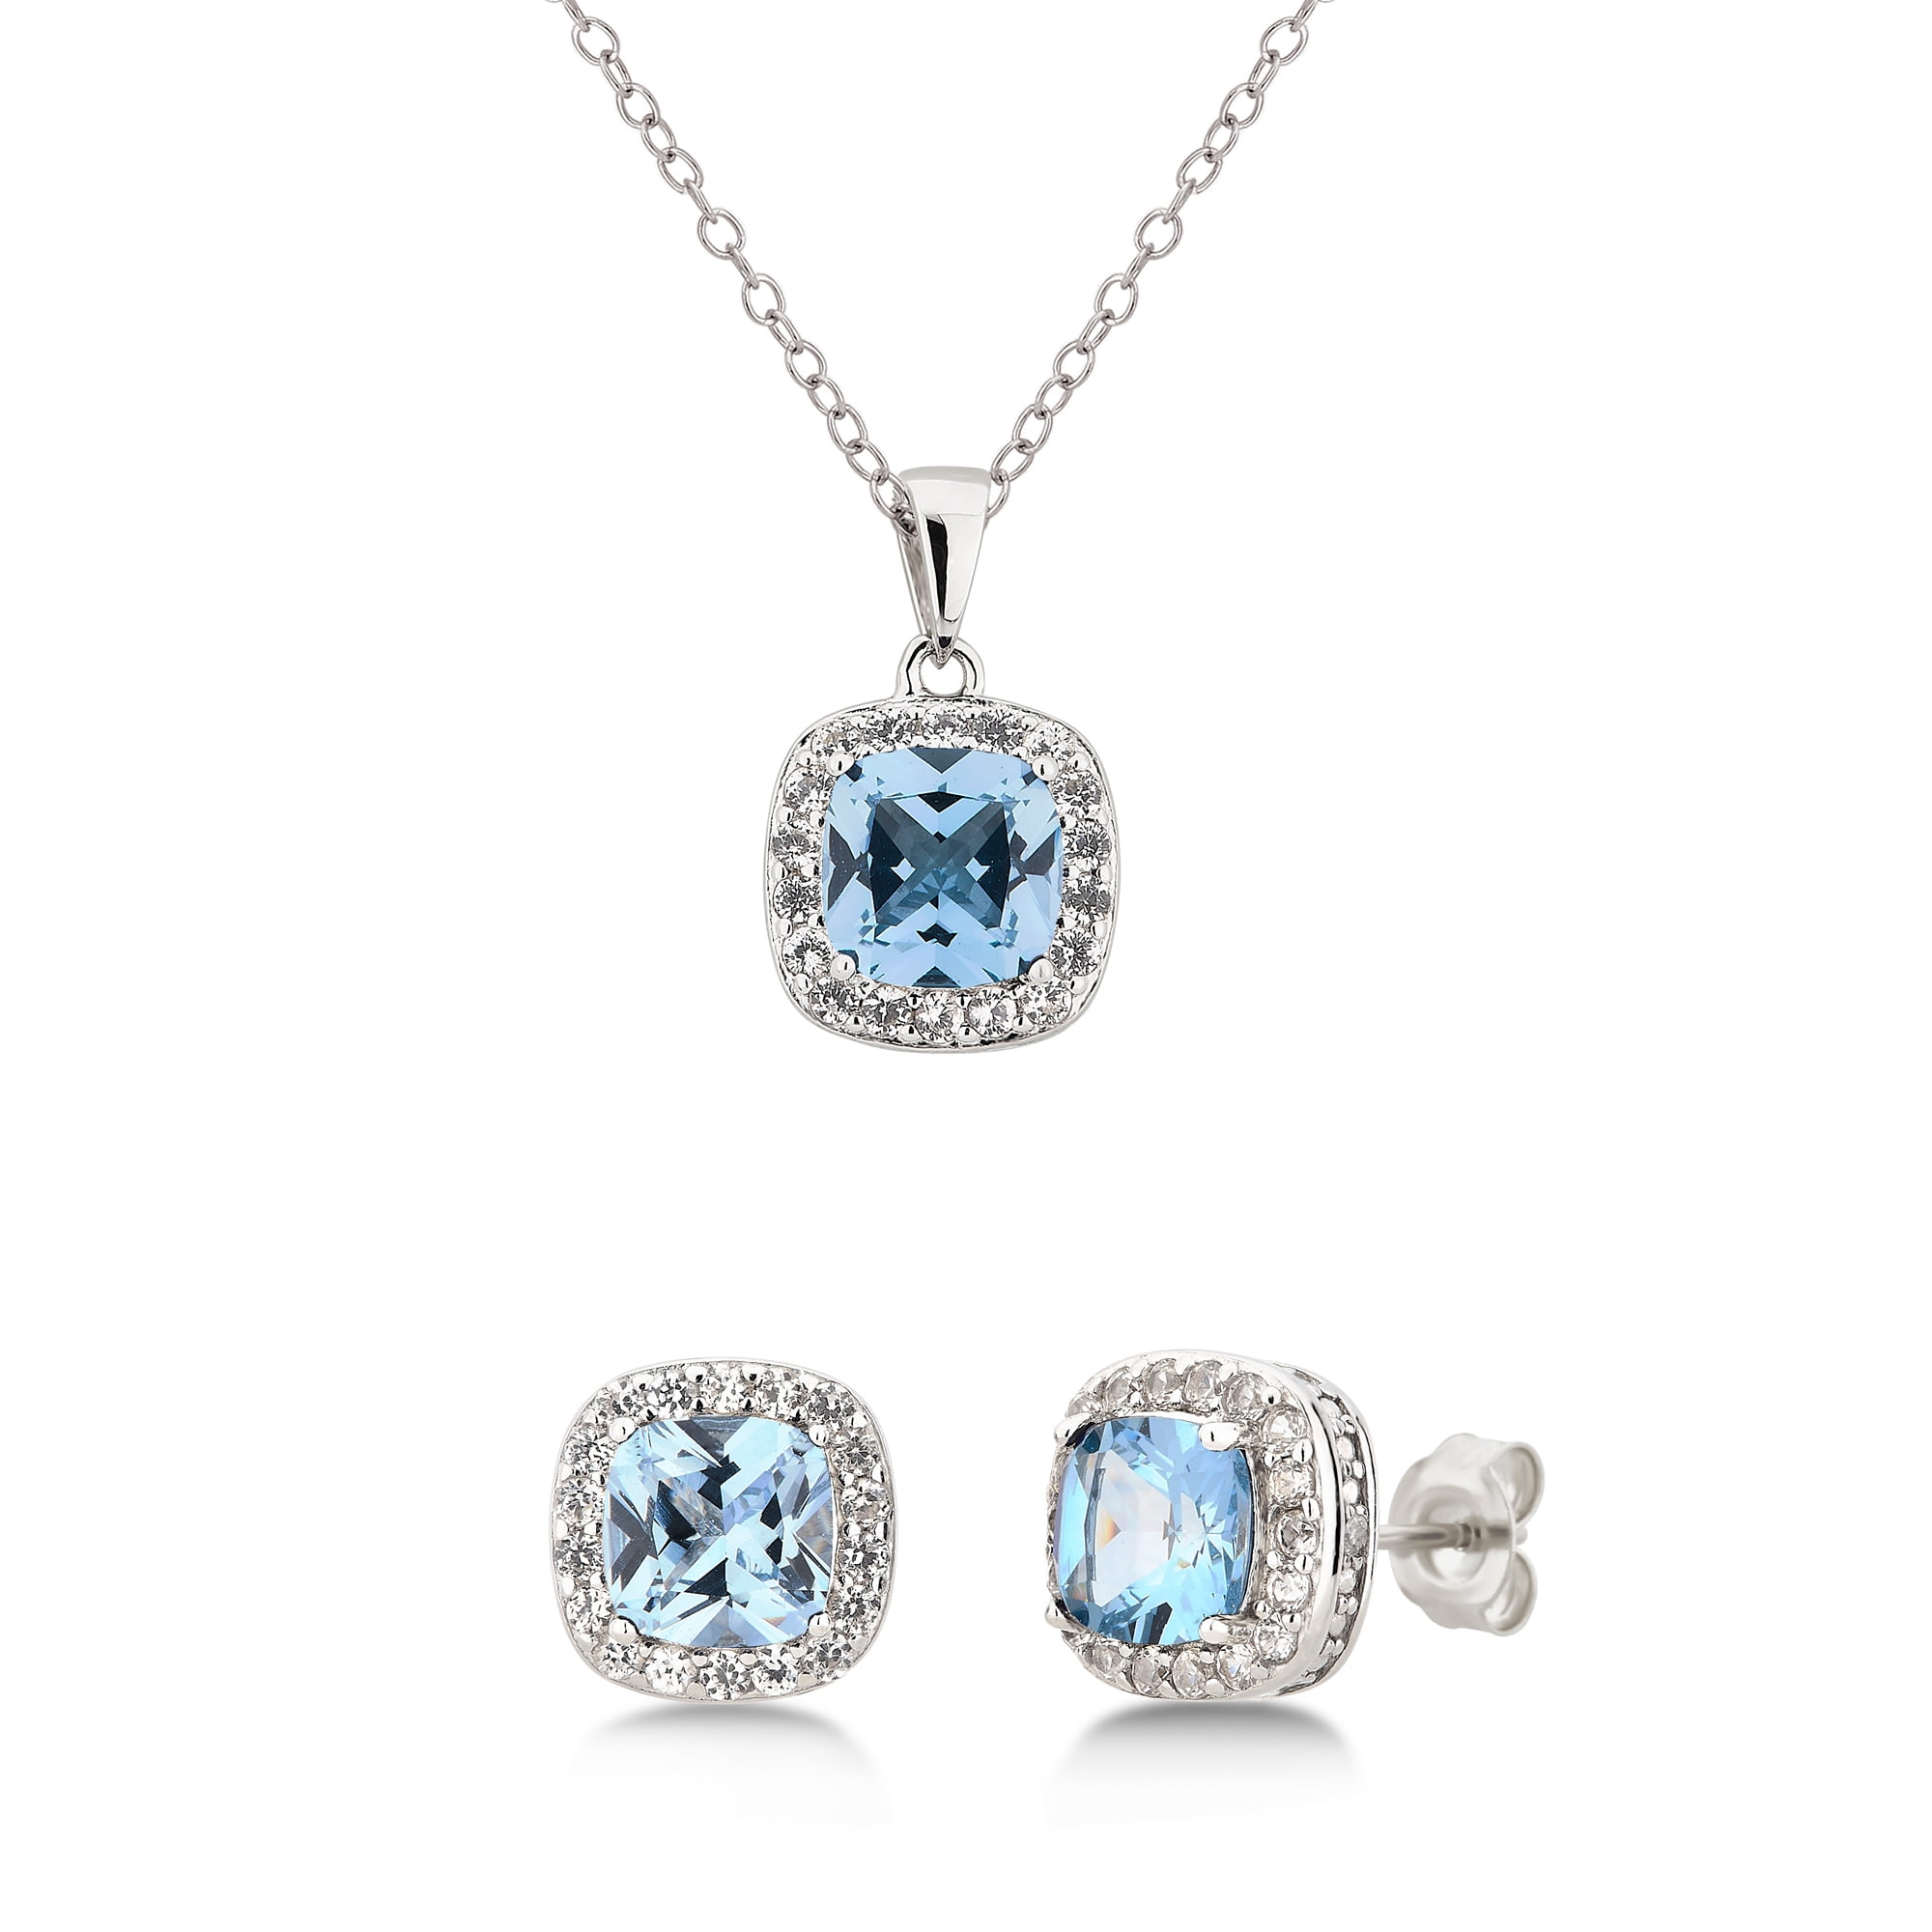 Orchid Jewelry 8.2 Ct Blue Topaz 925 Sterling Silver Link Necklace Birthday Gifts For Women 